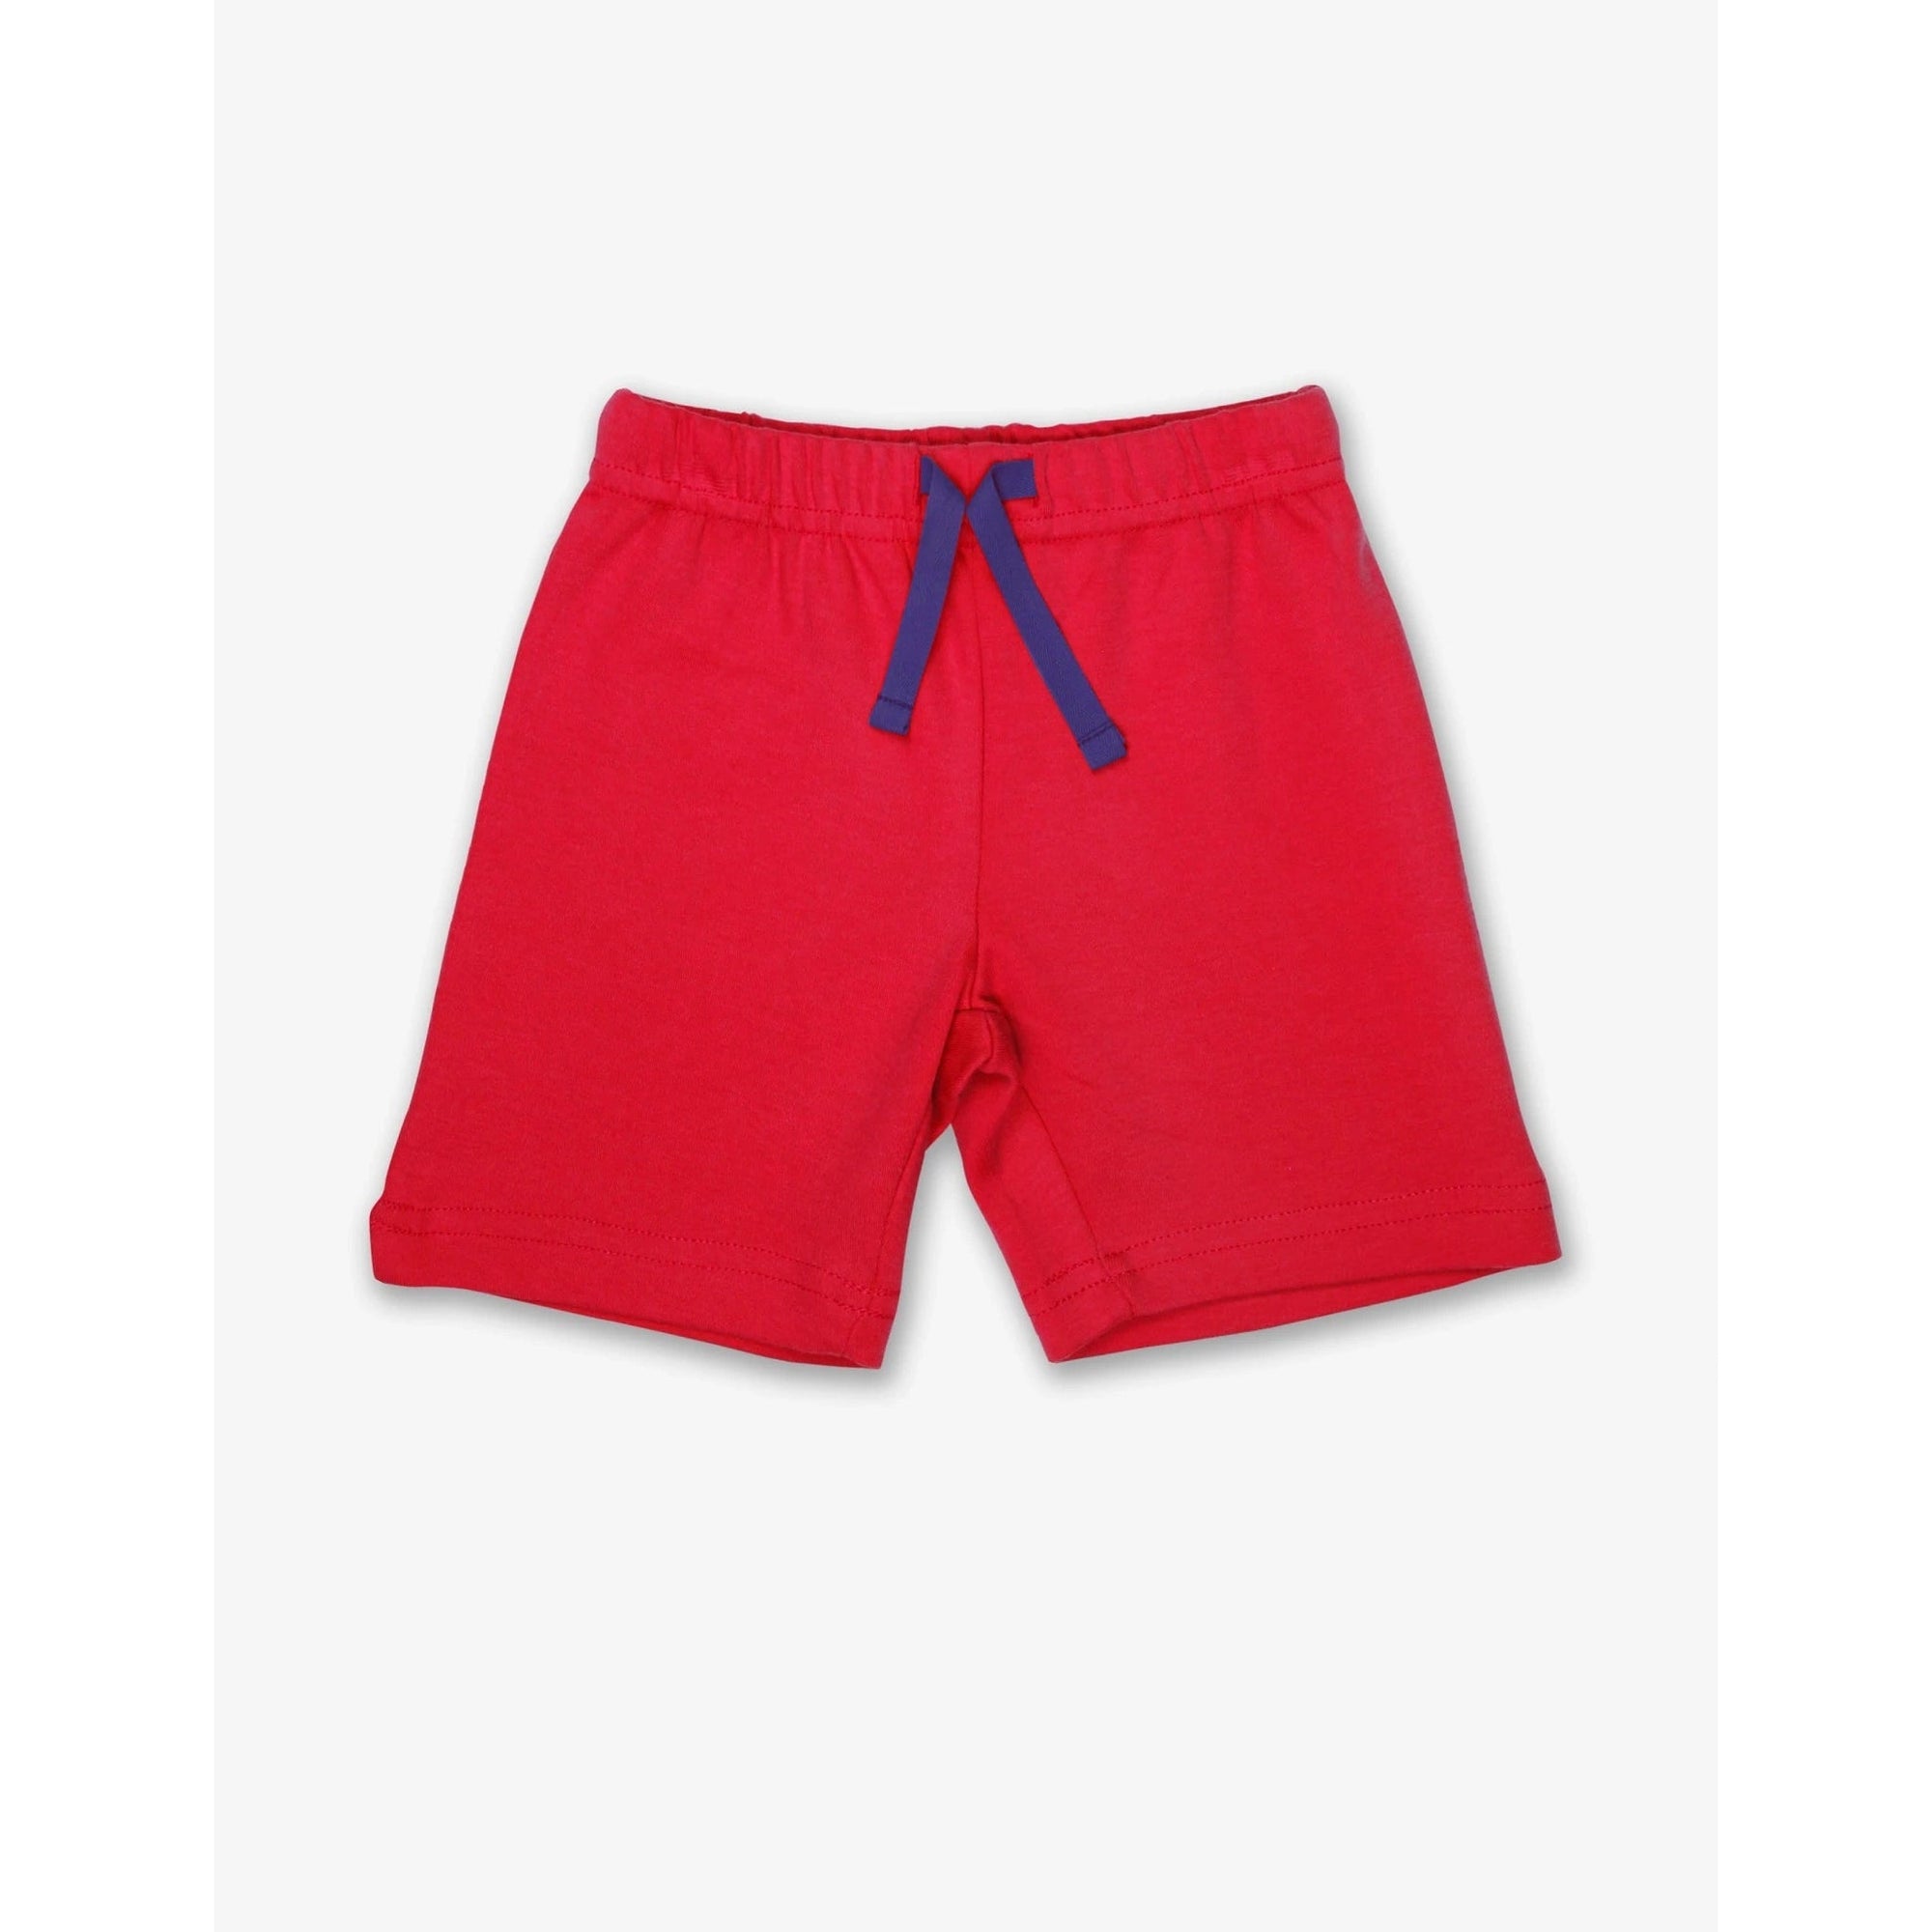 Red Shorts - 1 Left Size 18-24 months-Toby Tiger-Modern Rascals